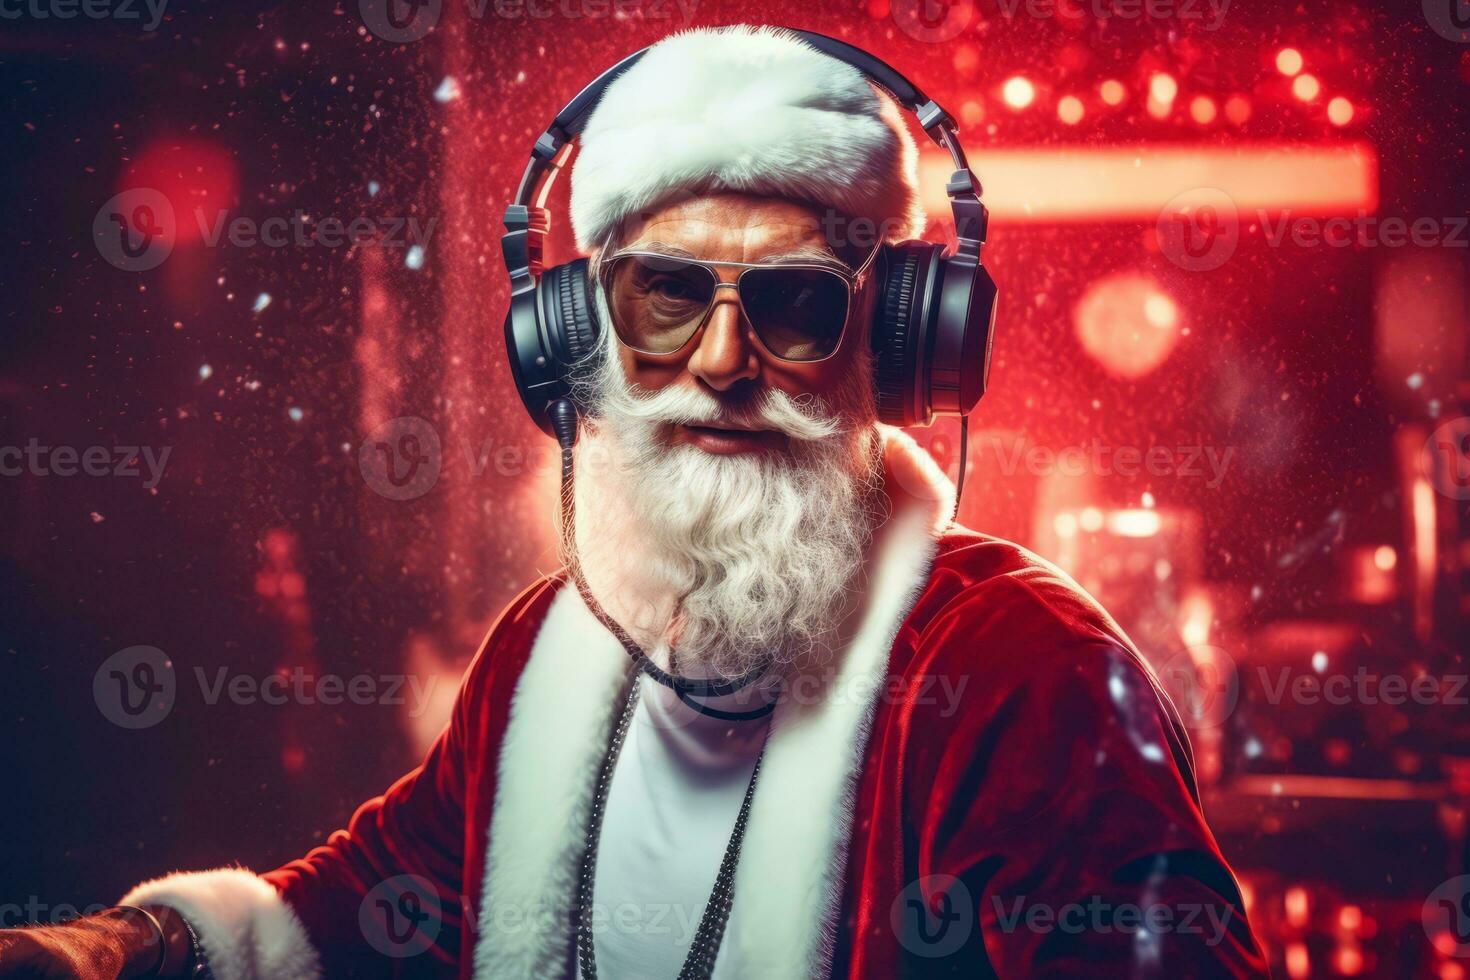 A lively and festive Christmas party with a Santa Claus DJ wearing headphones and glasses. He is standing behind a DJ mixer playing music. Red background, with a yellow light shining. Generative AI photo